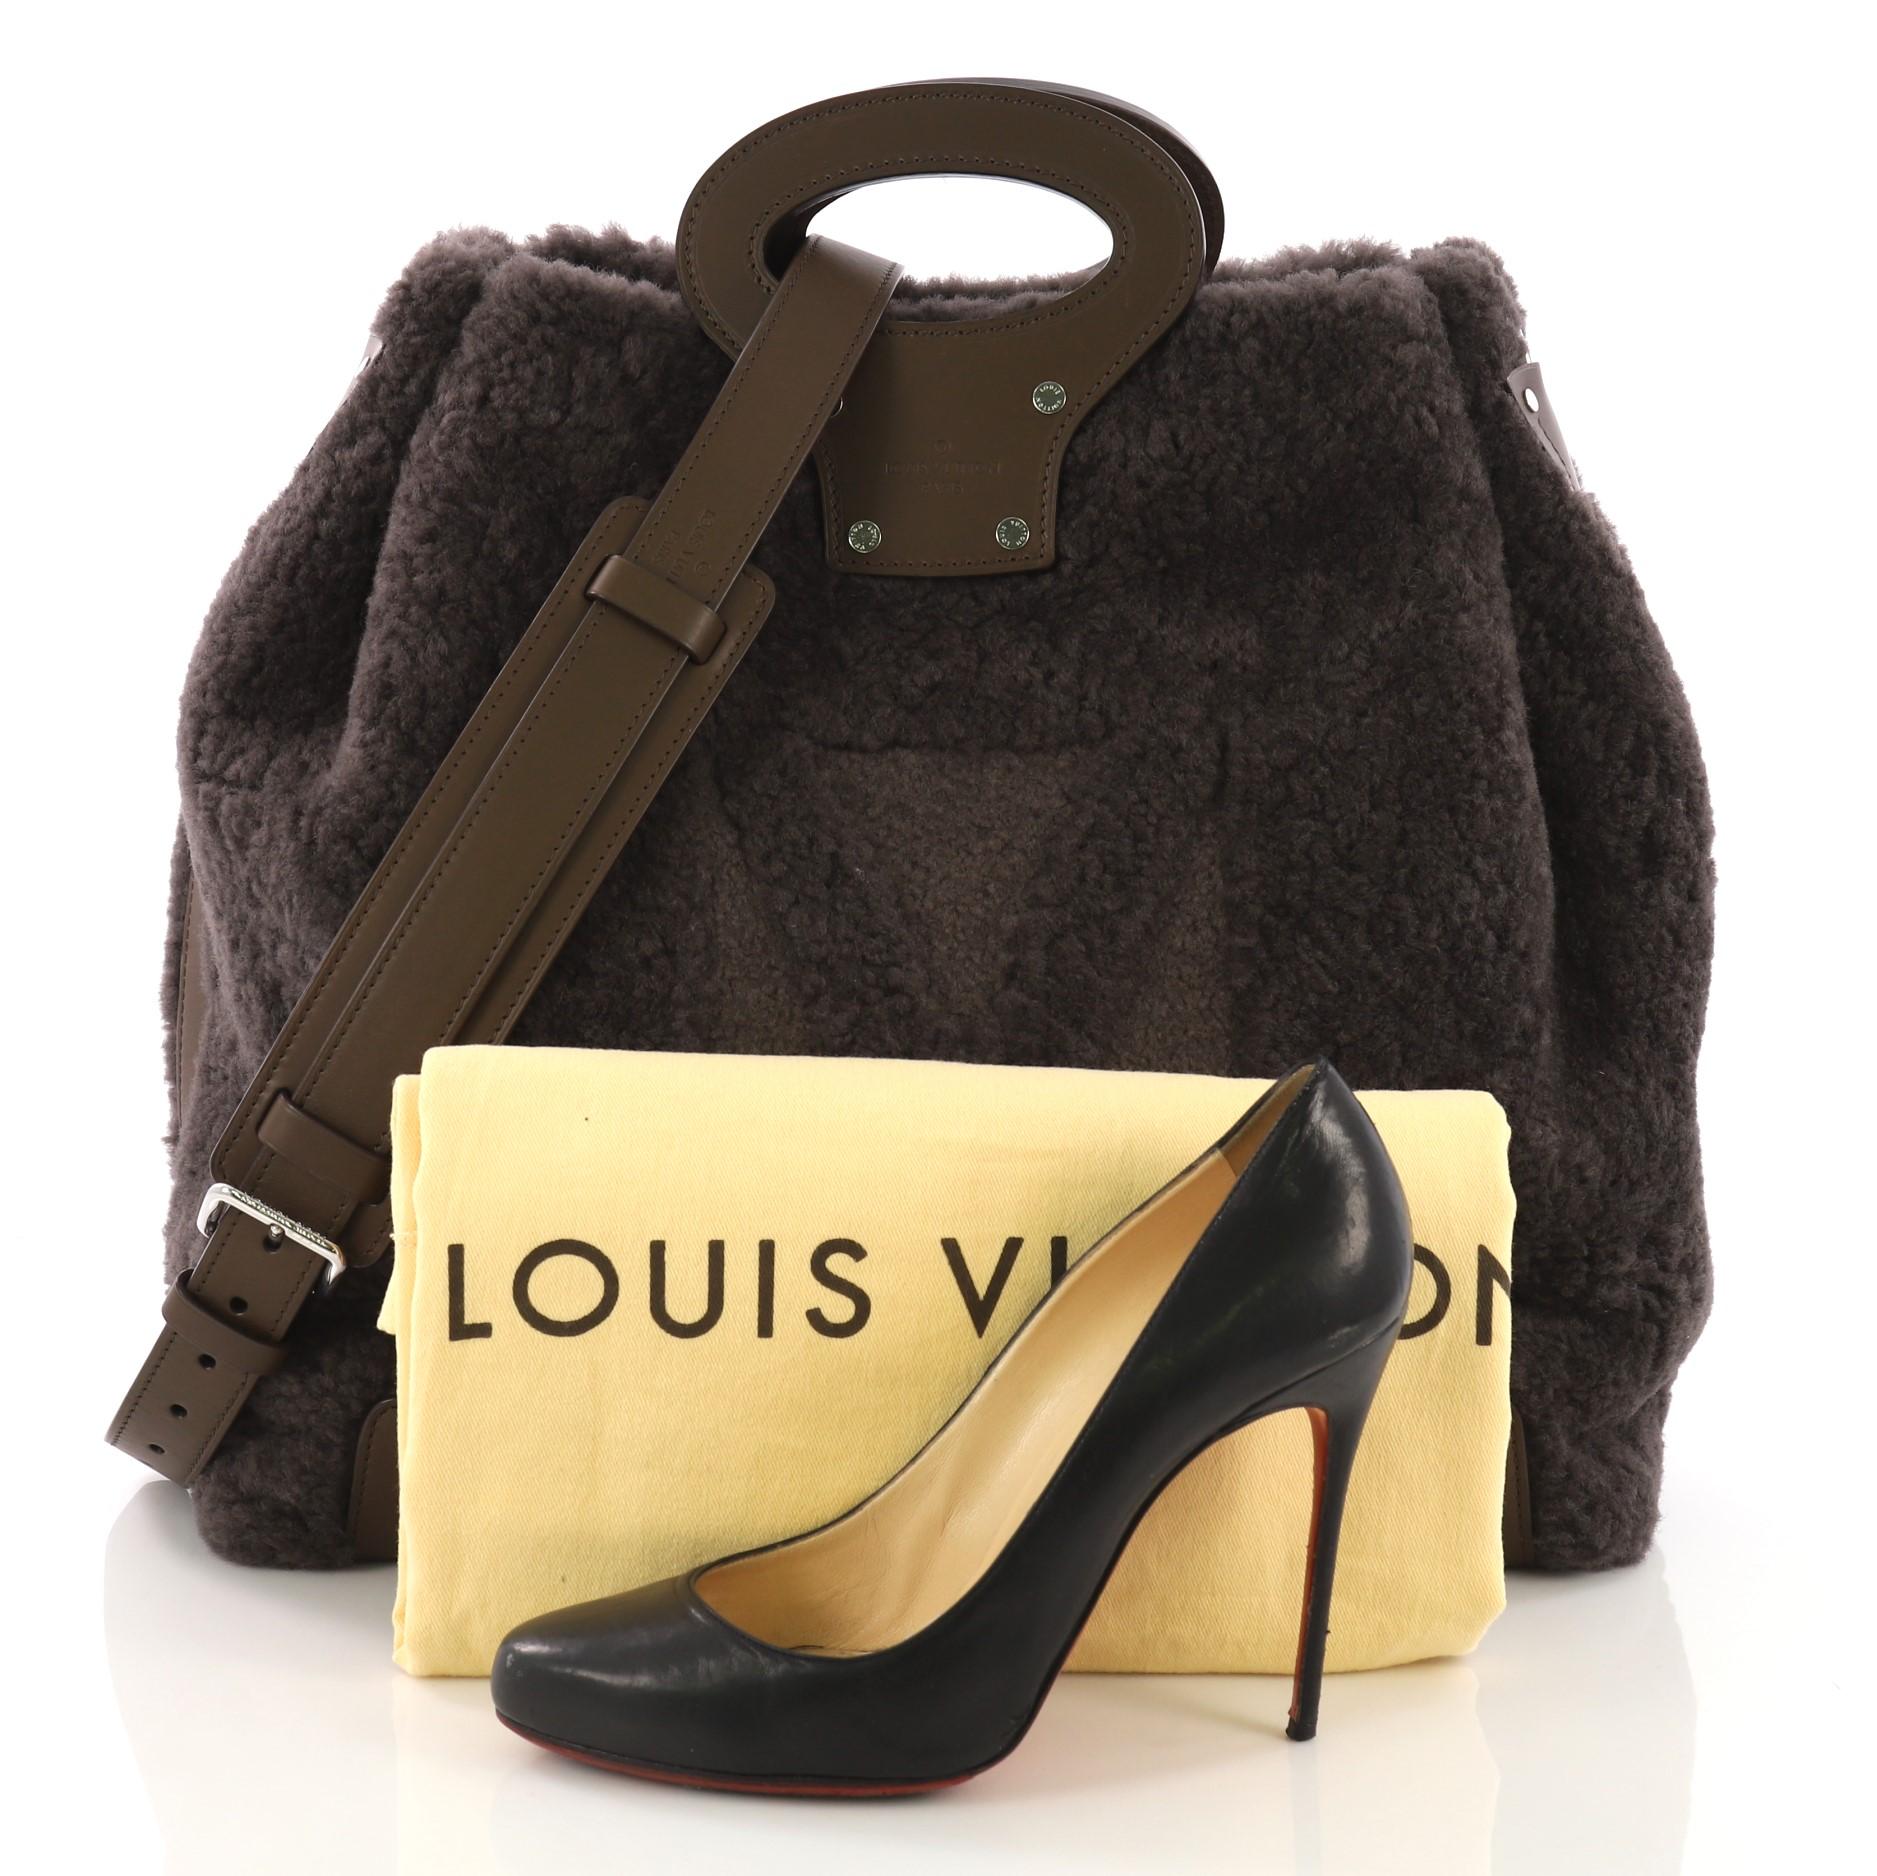 This Louis Vuitton Haut Cabas Shearling, crafted from gray shearling and brown leather, features dual top leather handles and silver-tone hardware. It opens to a brown microfiber interior with side slip pockets. Authenticity code reads: FO2183.